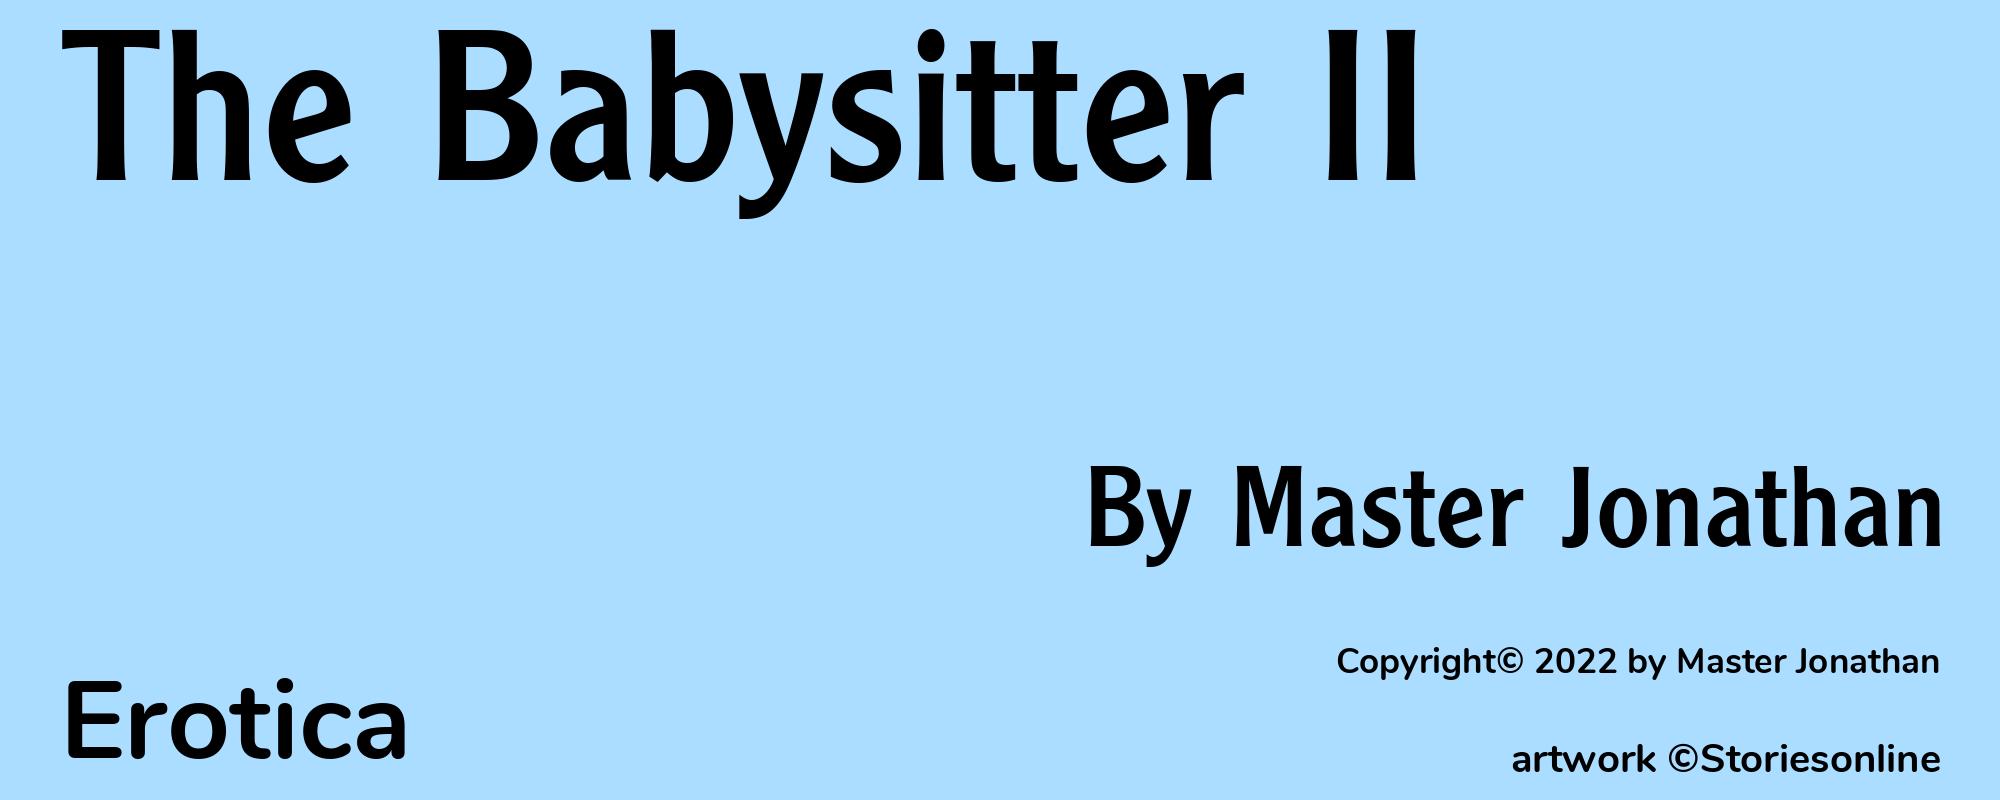 The Babysitter II - Cover